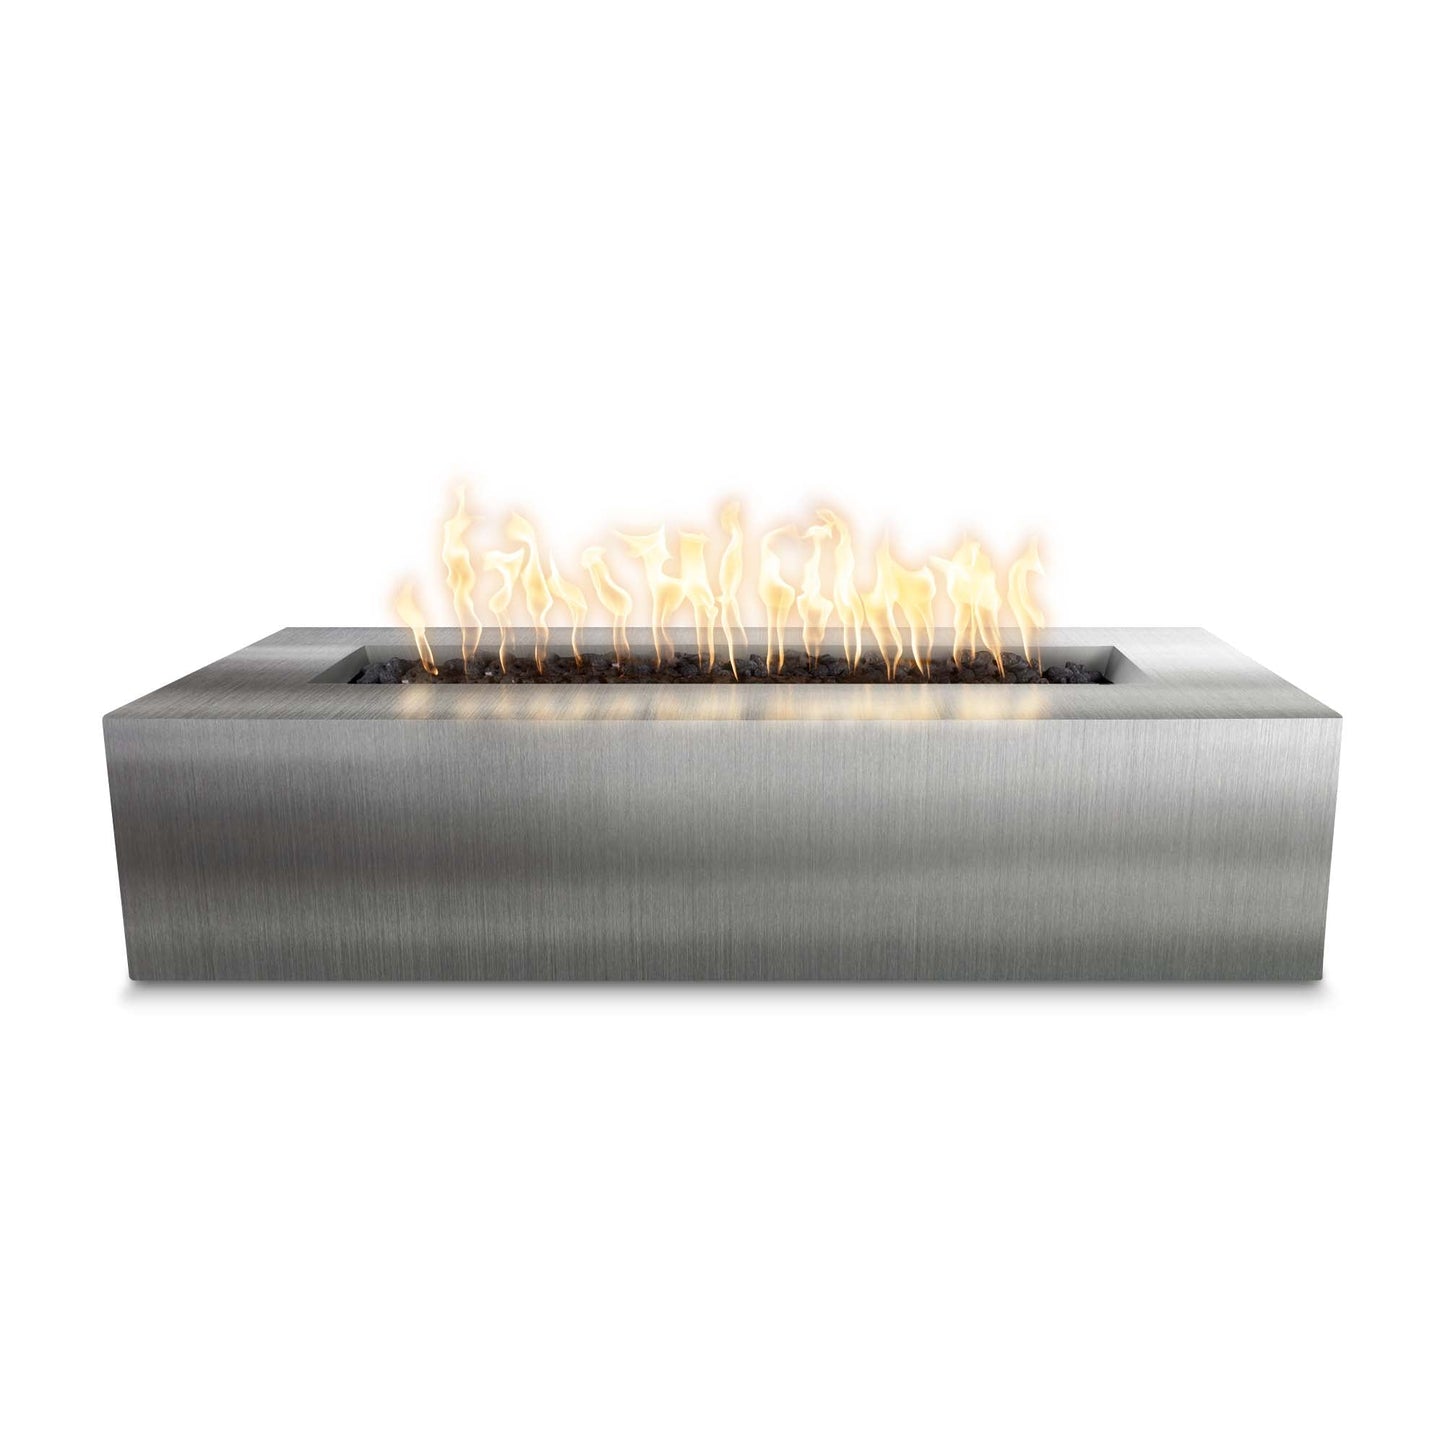 The Outdoor Plus Rectangular Regal 60" Stainless Steel Liquid Propane Fire Pit with Flame Sense with Spark Ignition